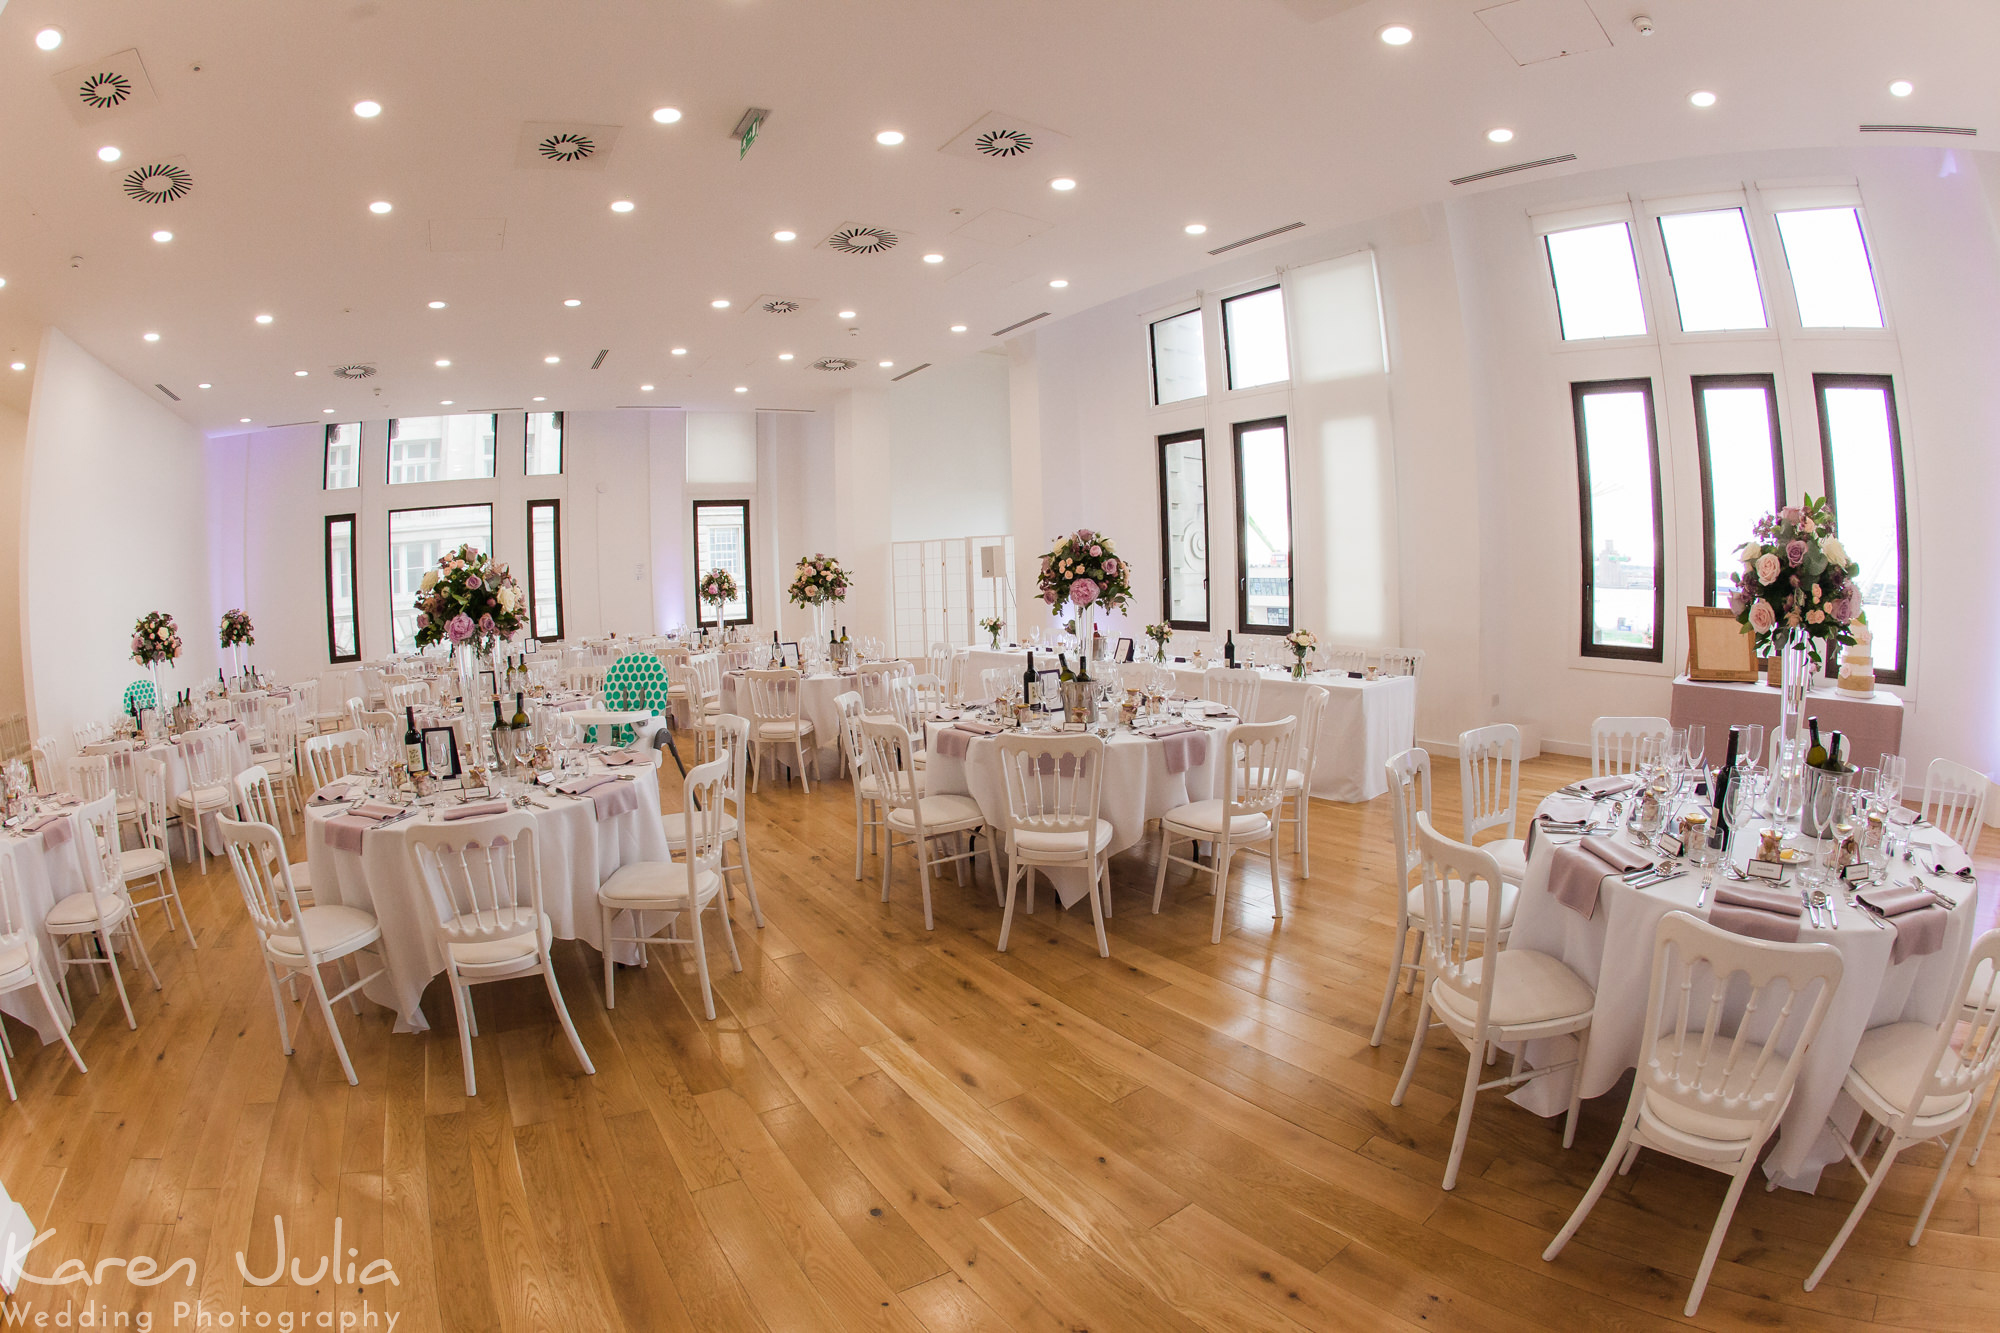 the wedding breakfast room at the Royal Liver building